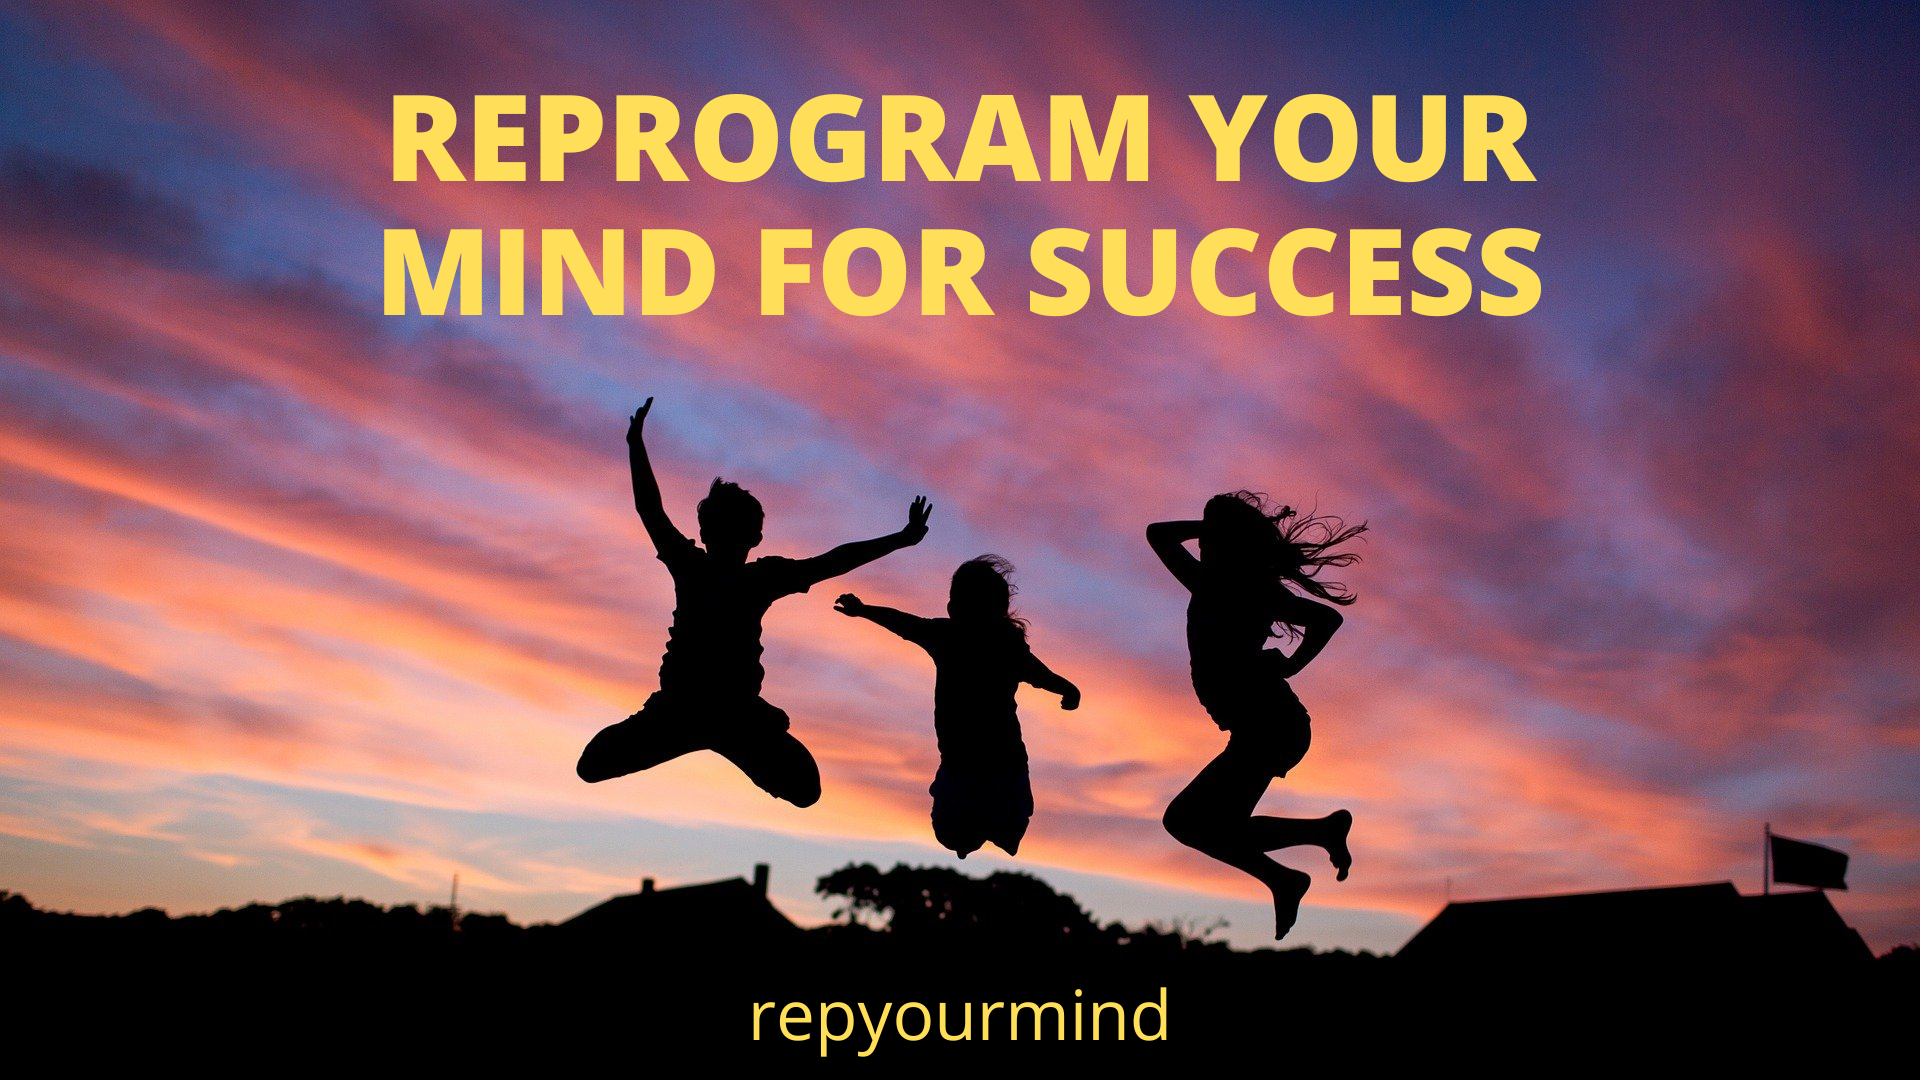 REPROGRAM YOUR MIND FOR SUCCESS